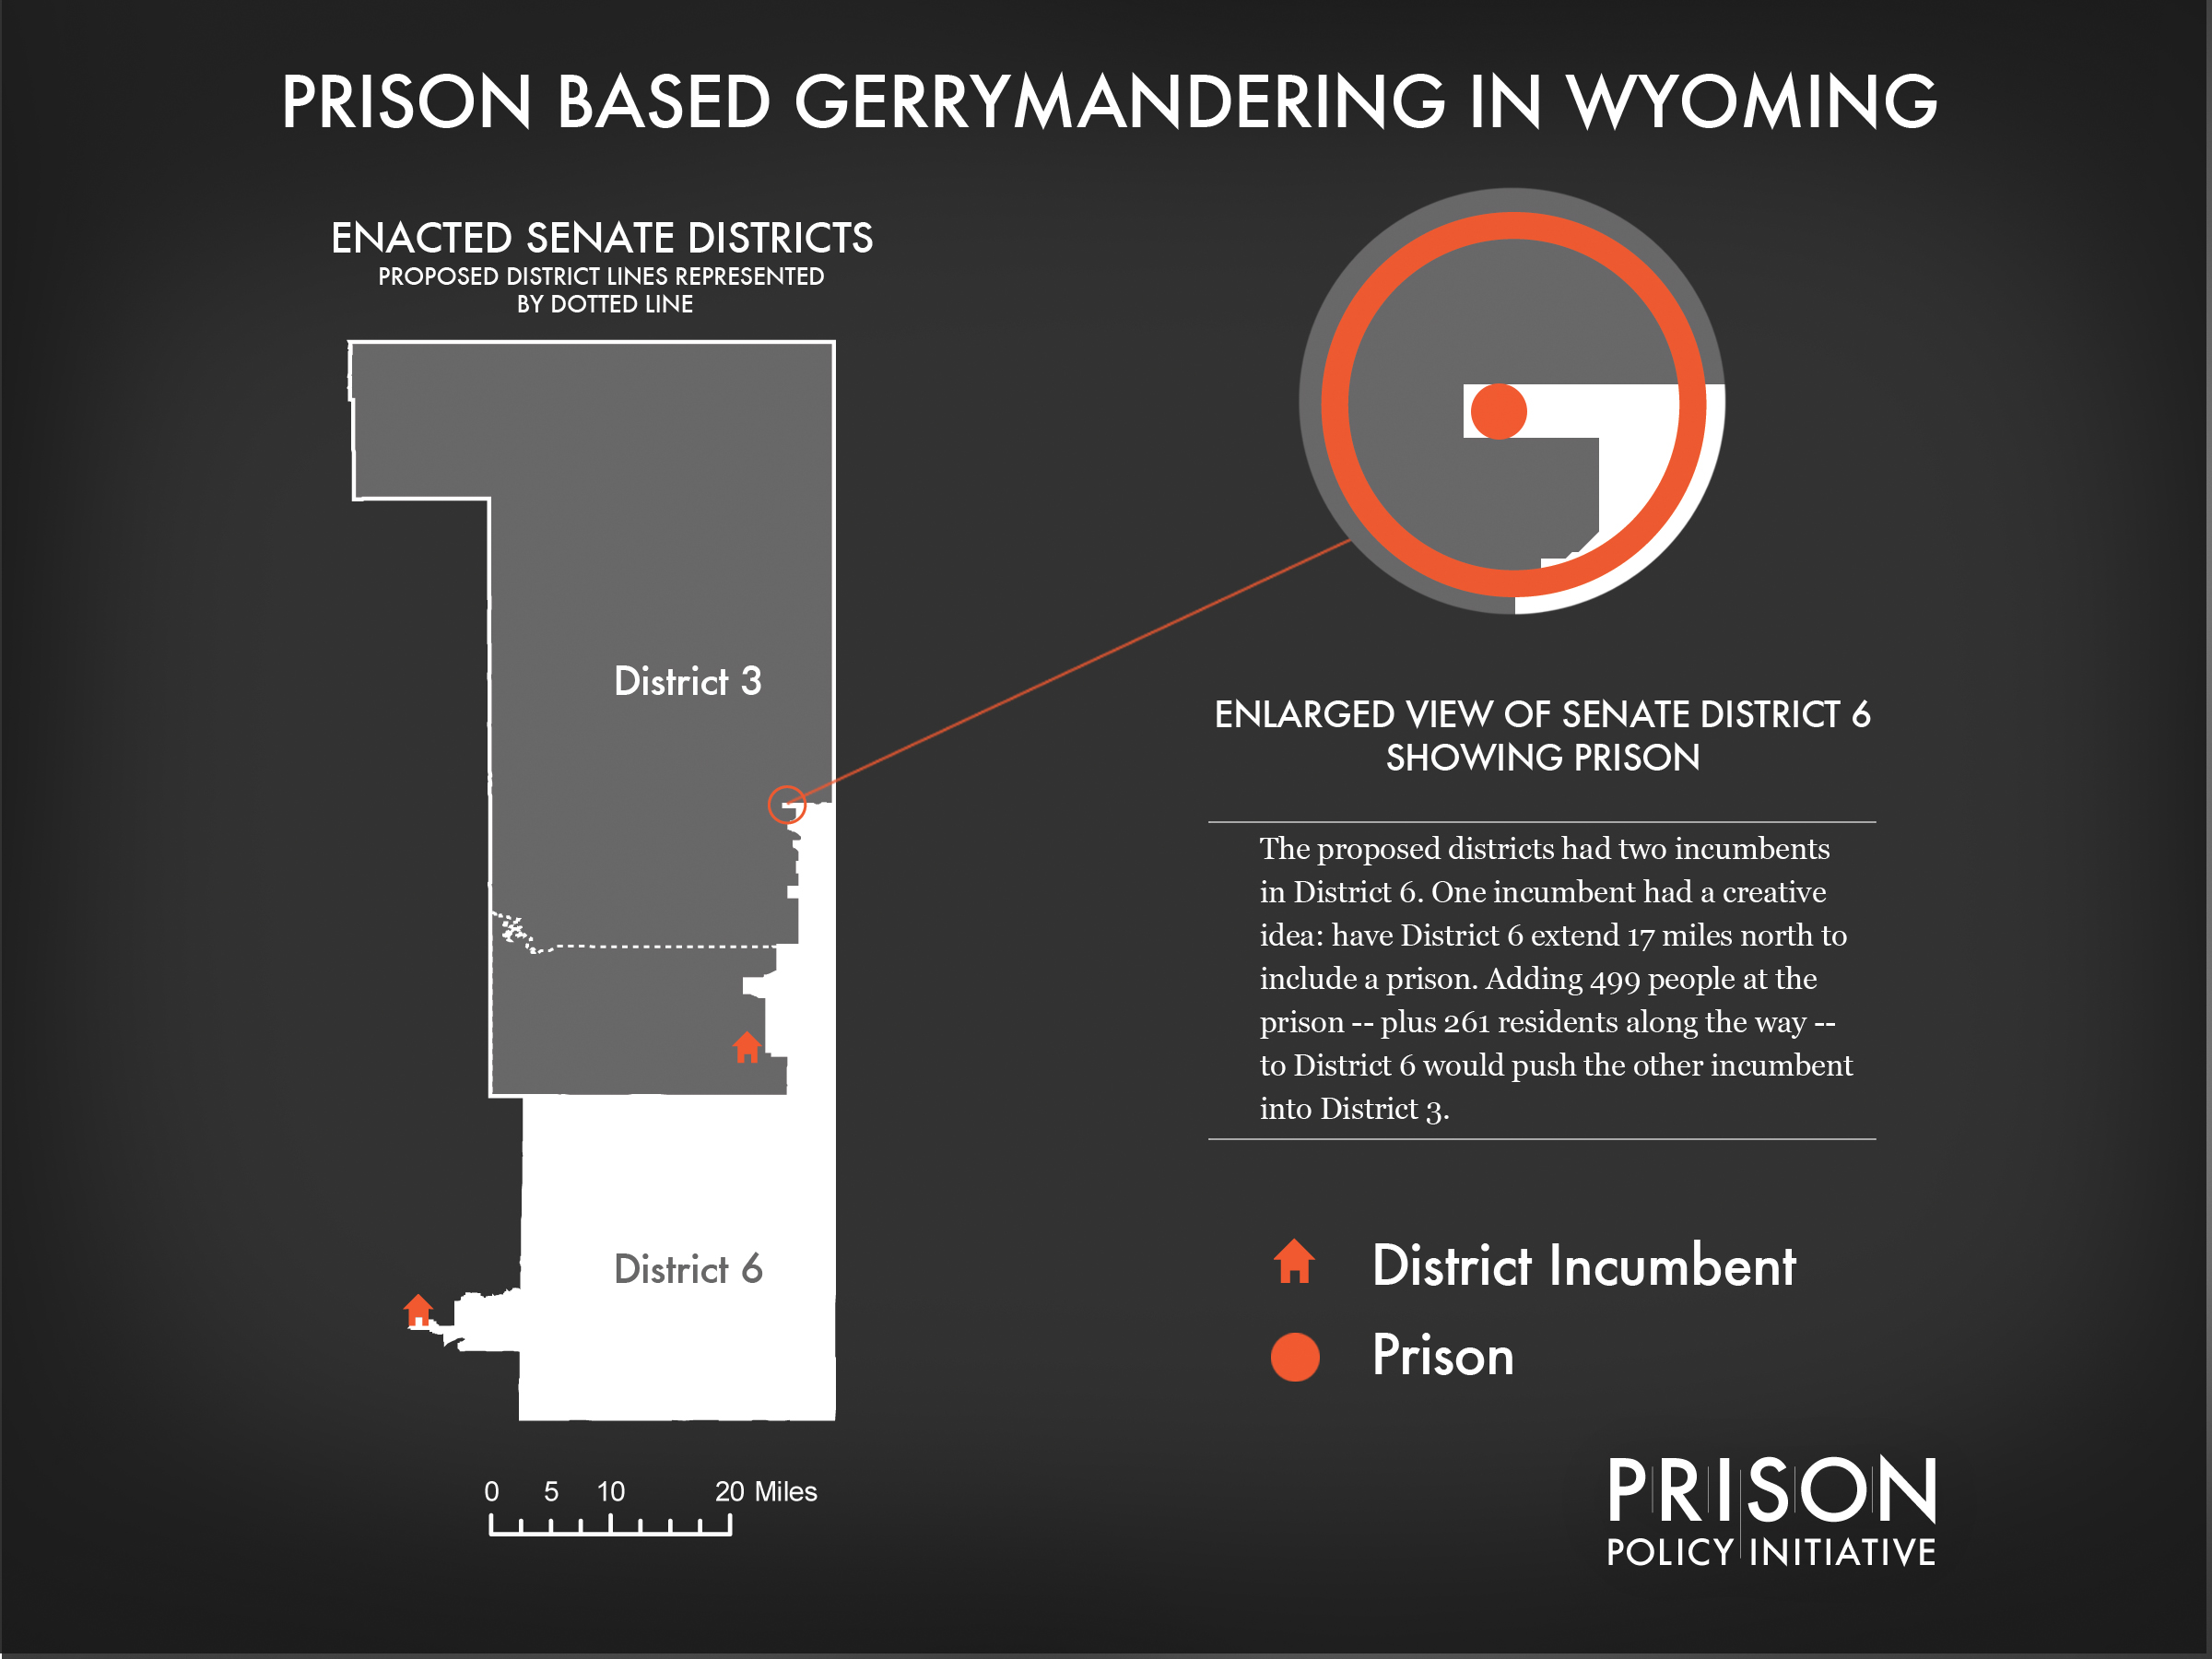 Map showing how Wyoming Senate District 6 goes 17 miles out of way to snag a prison and shift an incumbent into a separate district.